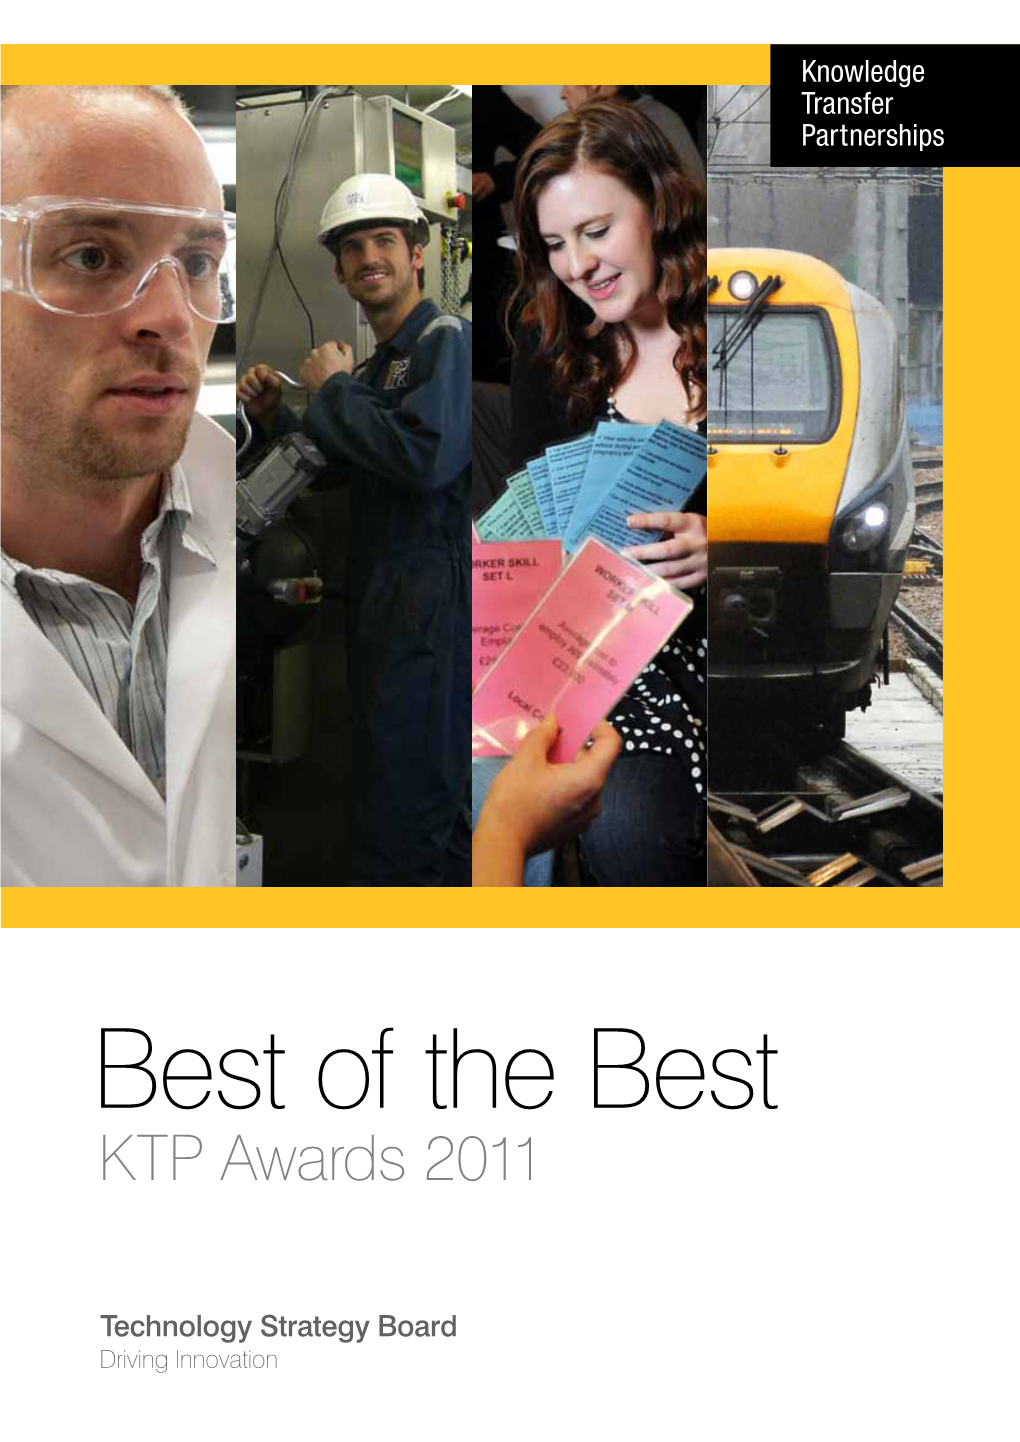 KTP Awards 2011: Business Leader of Tomorrow